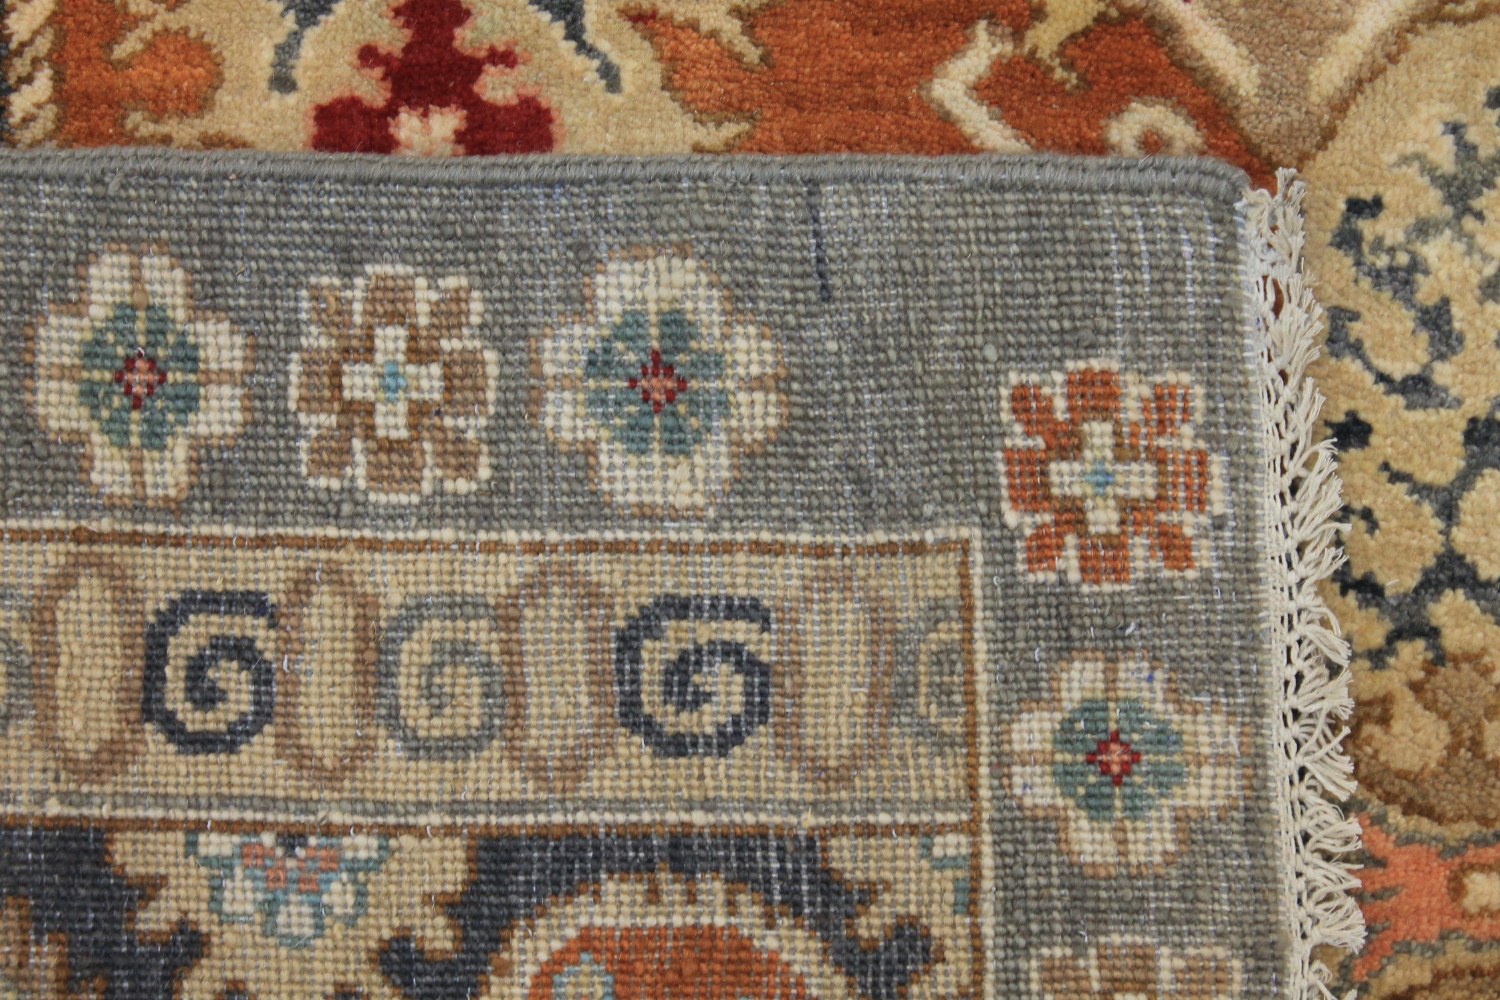 8x10 Traditional Hand Knotted Wool Area Rug - MR028762